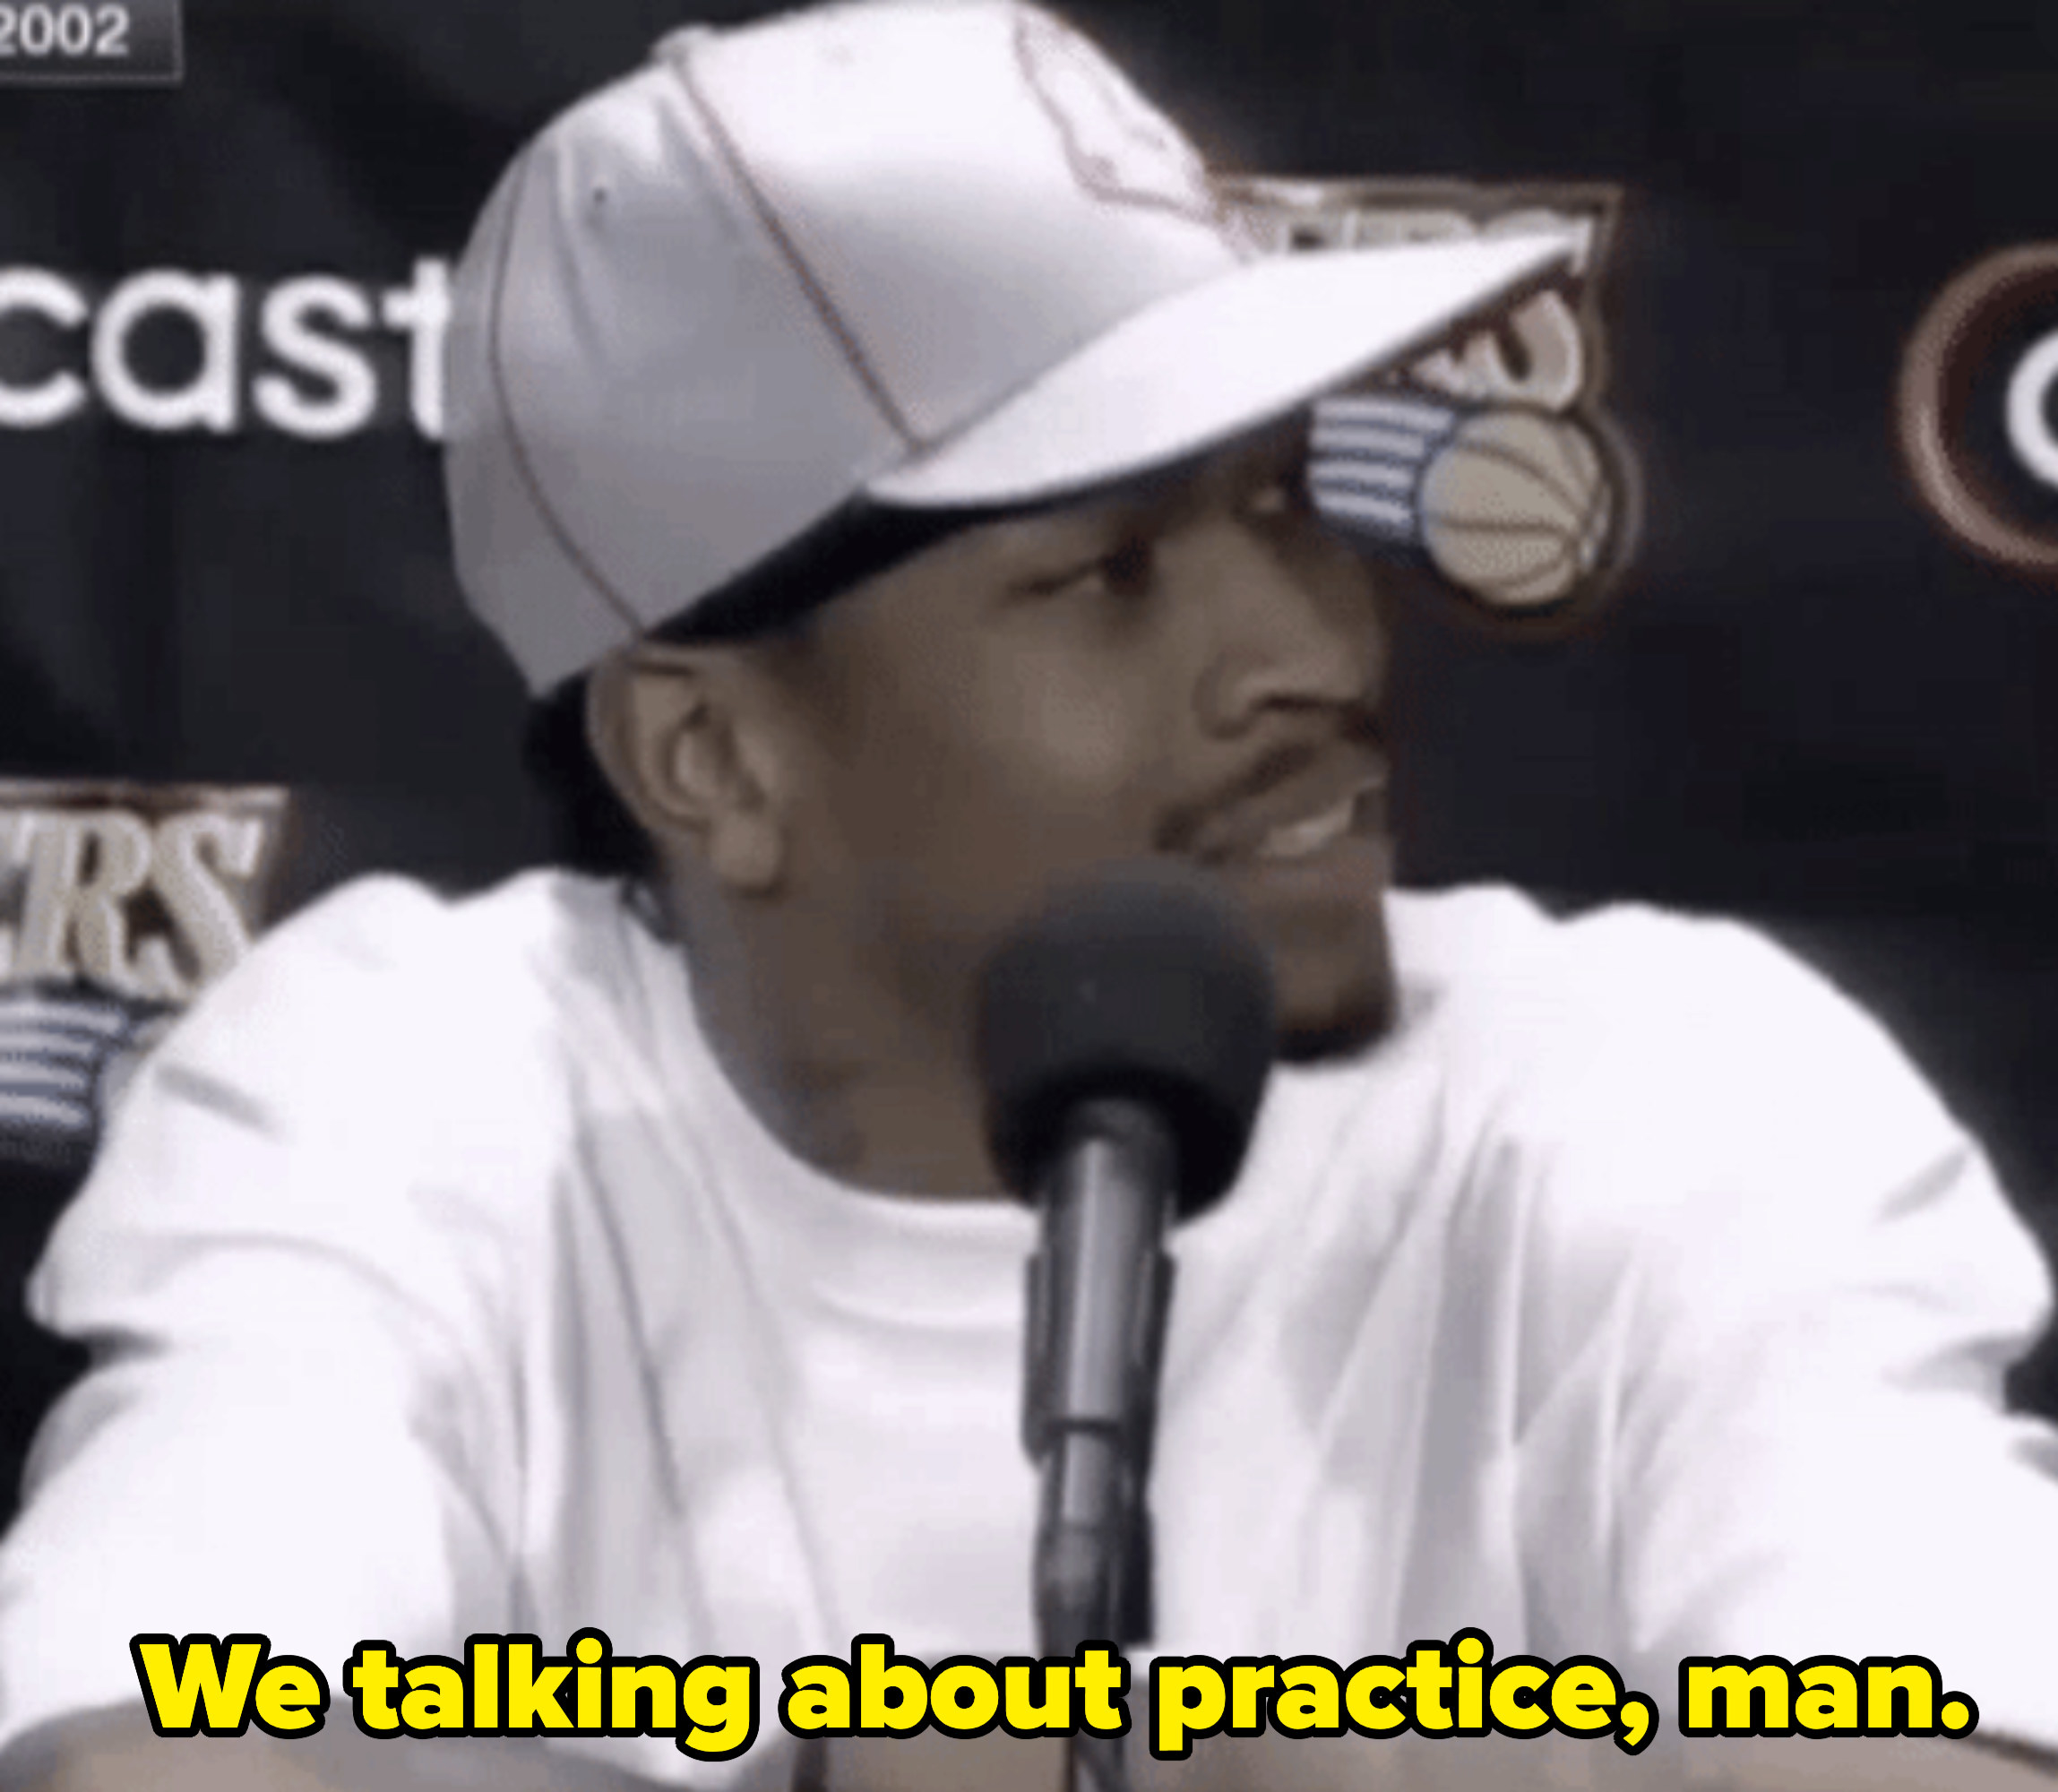 Allen Iverson at a press conference after a basketball game, saying: &quot;We talking about practice, man&quot;